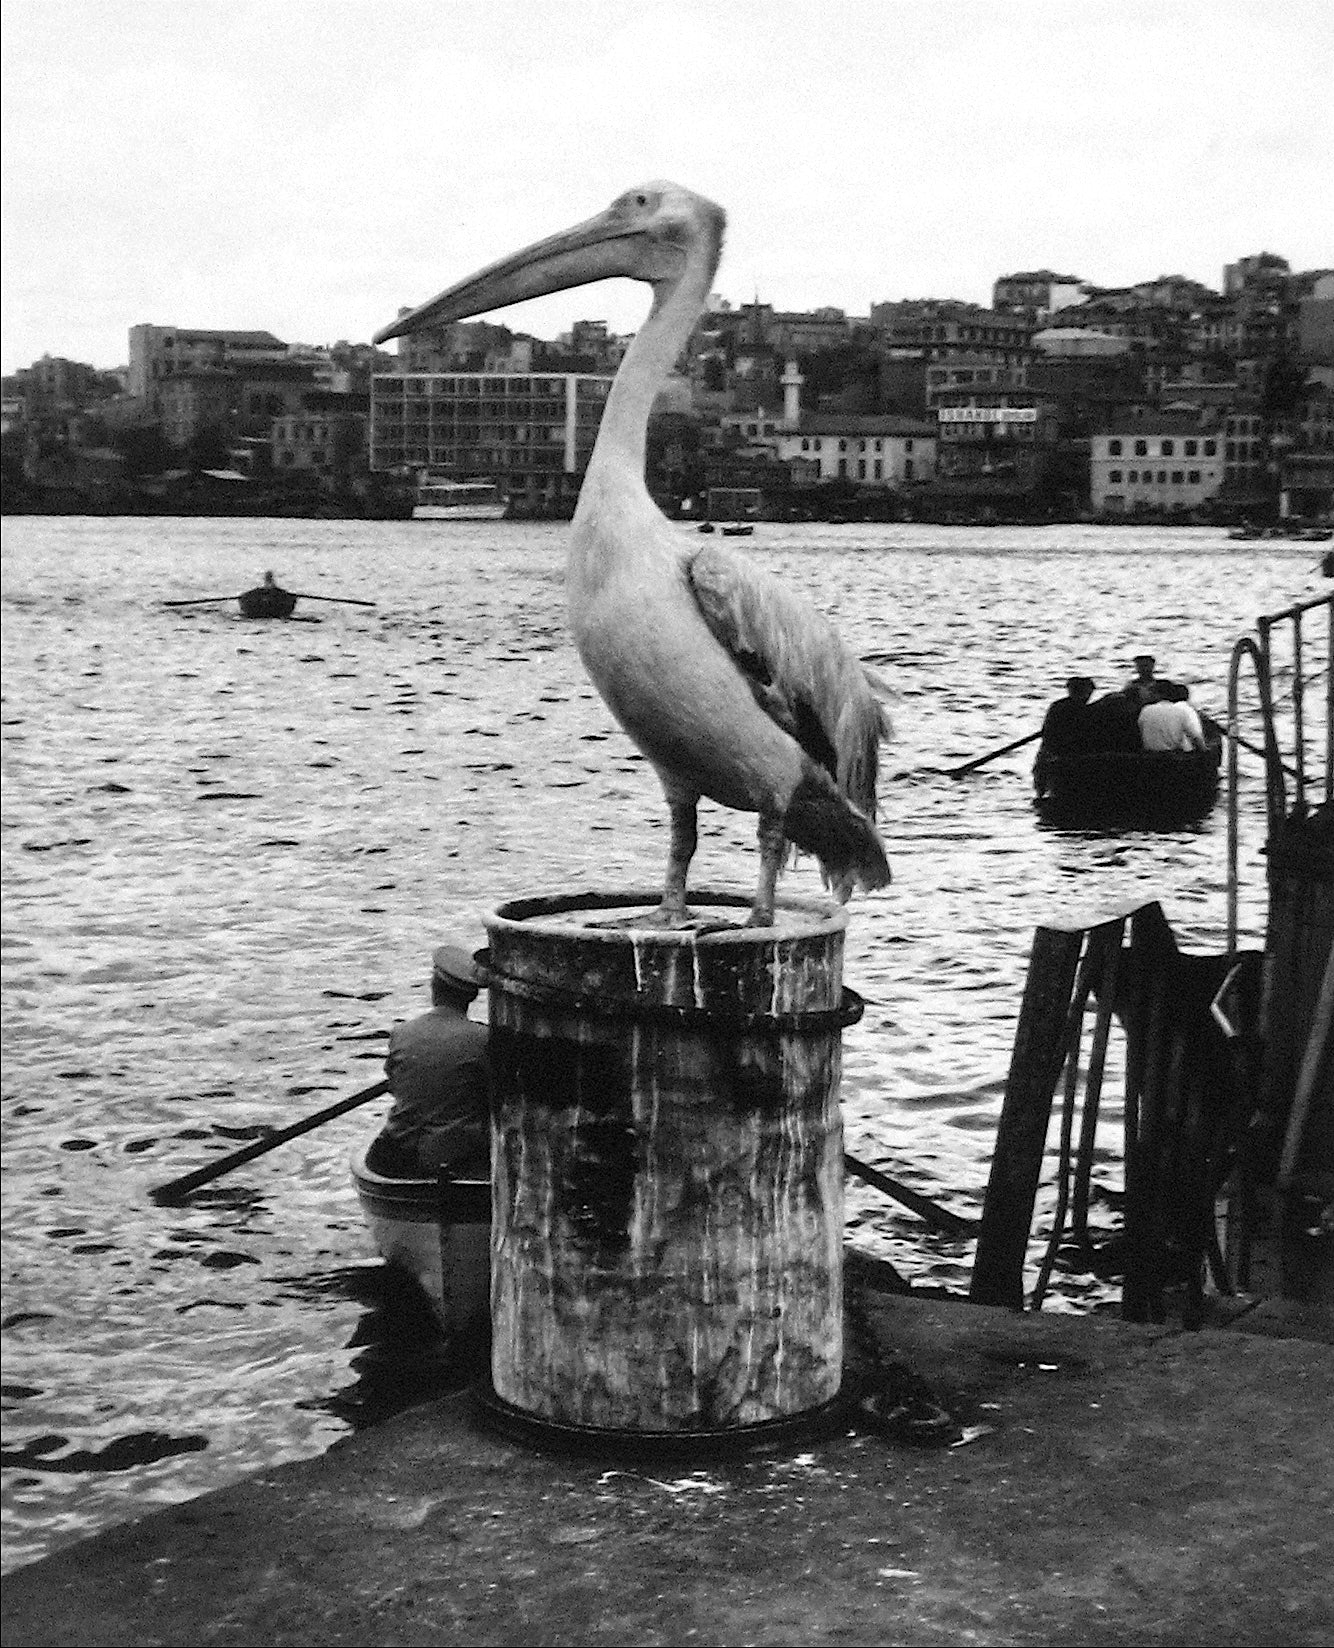 Pelican on the Dock<br>1960s Photograph<br><br>#12156